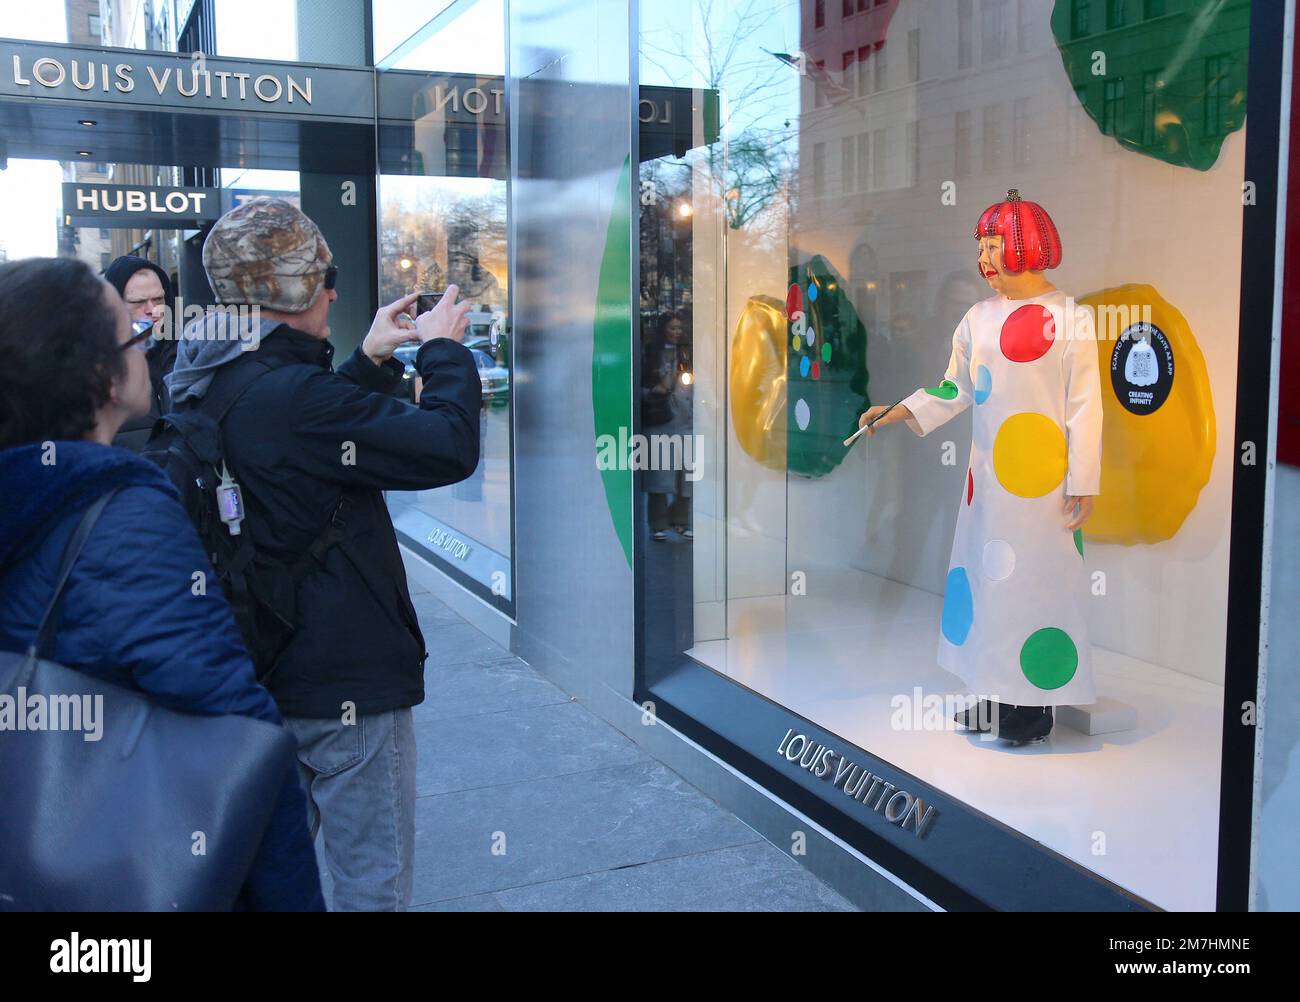 A realistic robot of Japanese artist Yayoi Kusama in the window of